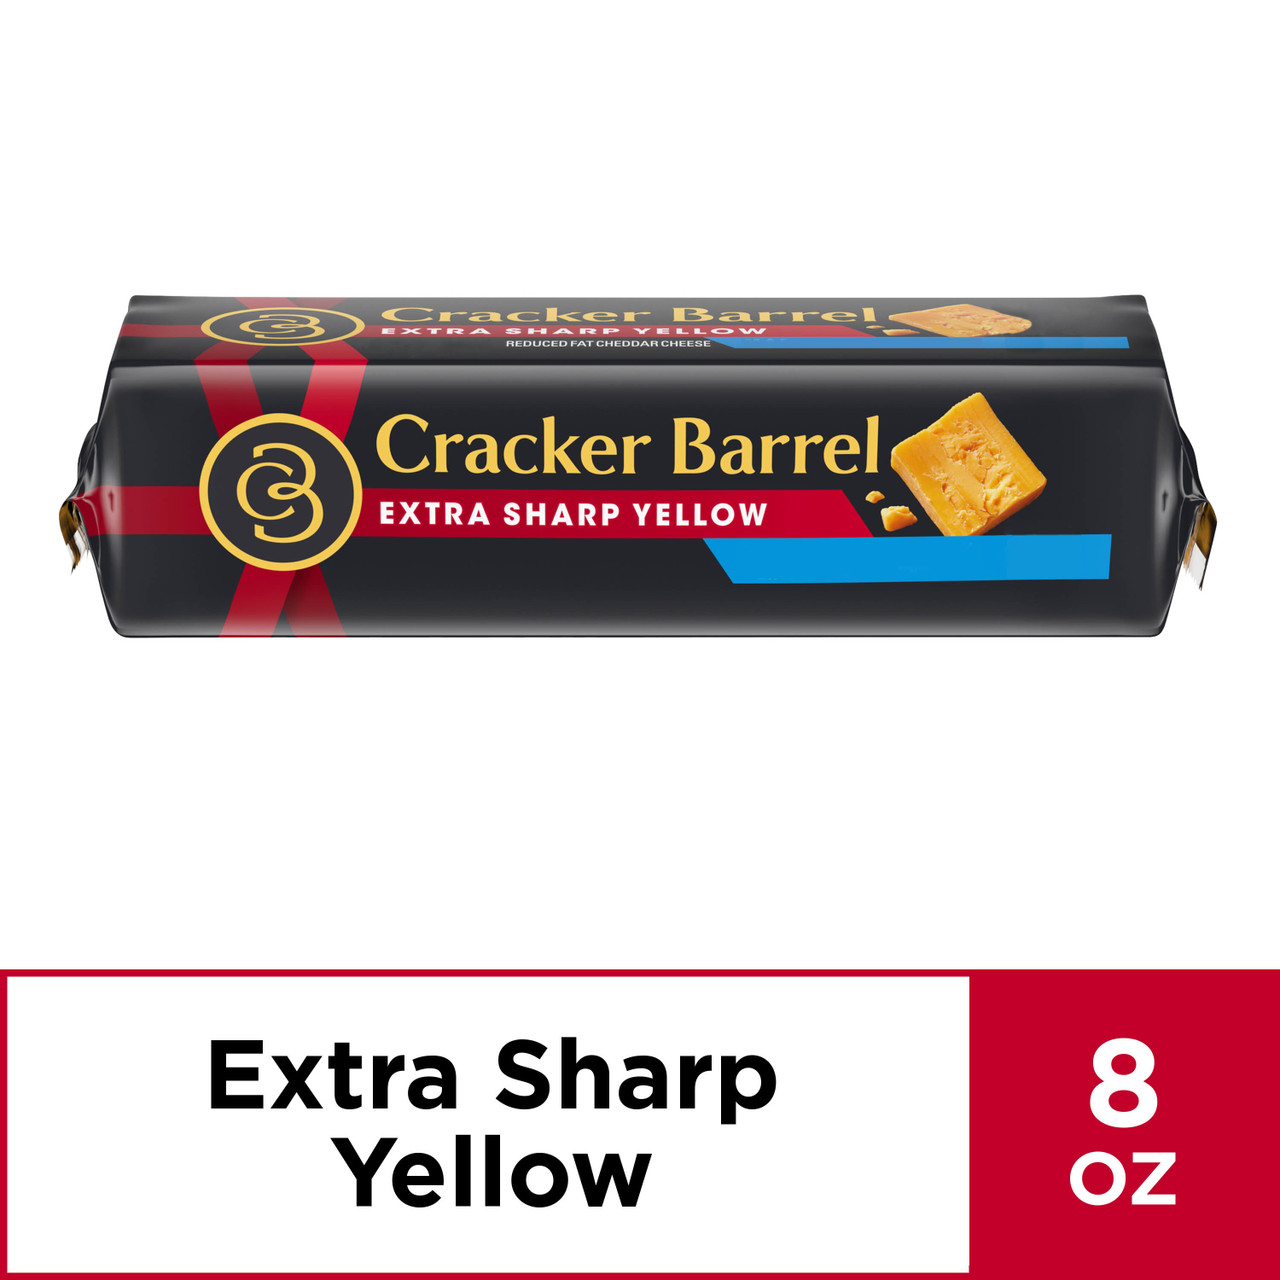 Easy Cheese - Easy Cheese, Cheese Snack, Sharp Cheddar (8 oz